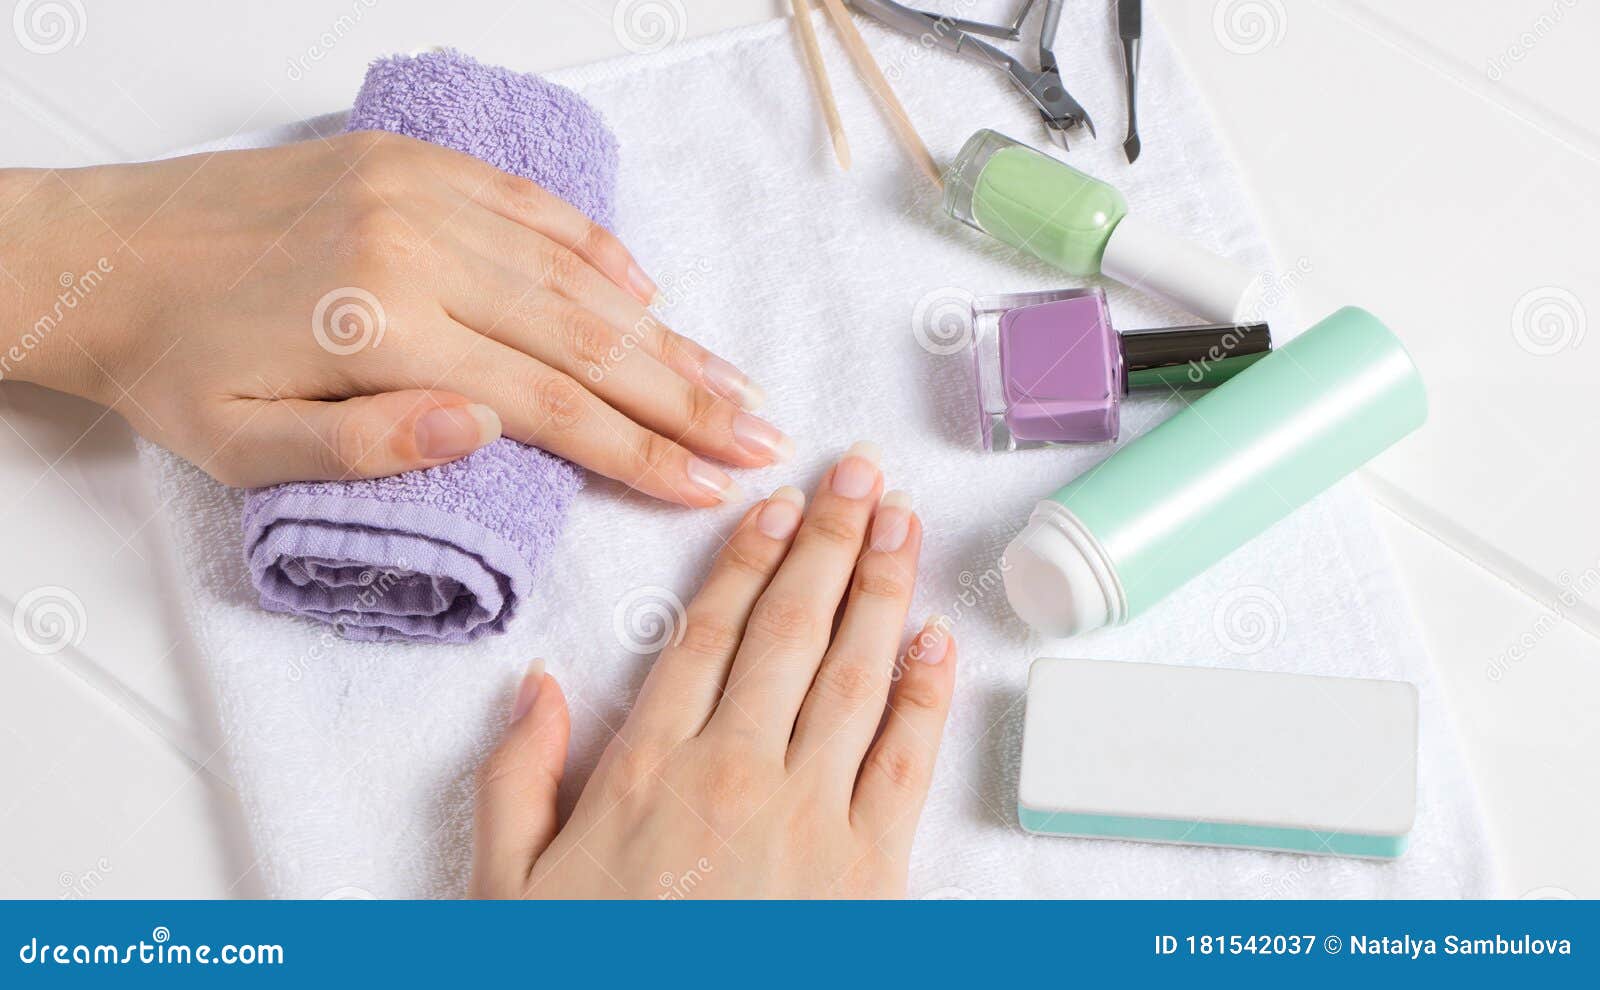 Manicure. Women`s Hands on a Towel. Manicure Tools, Nail Polish. Home Nail  Care, SPA, Beauty. Long Natural Nails Stock Image - Image of cosmetics, care:  181542037